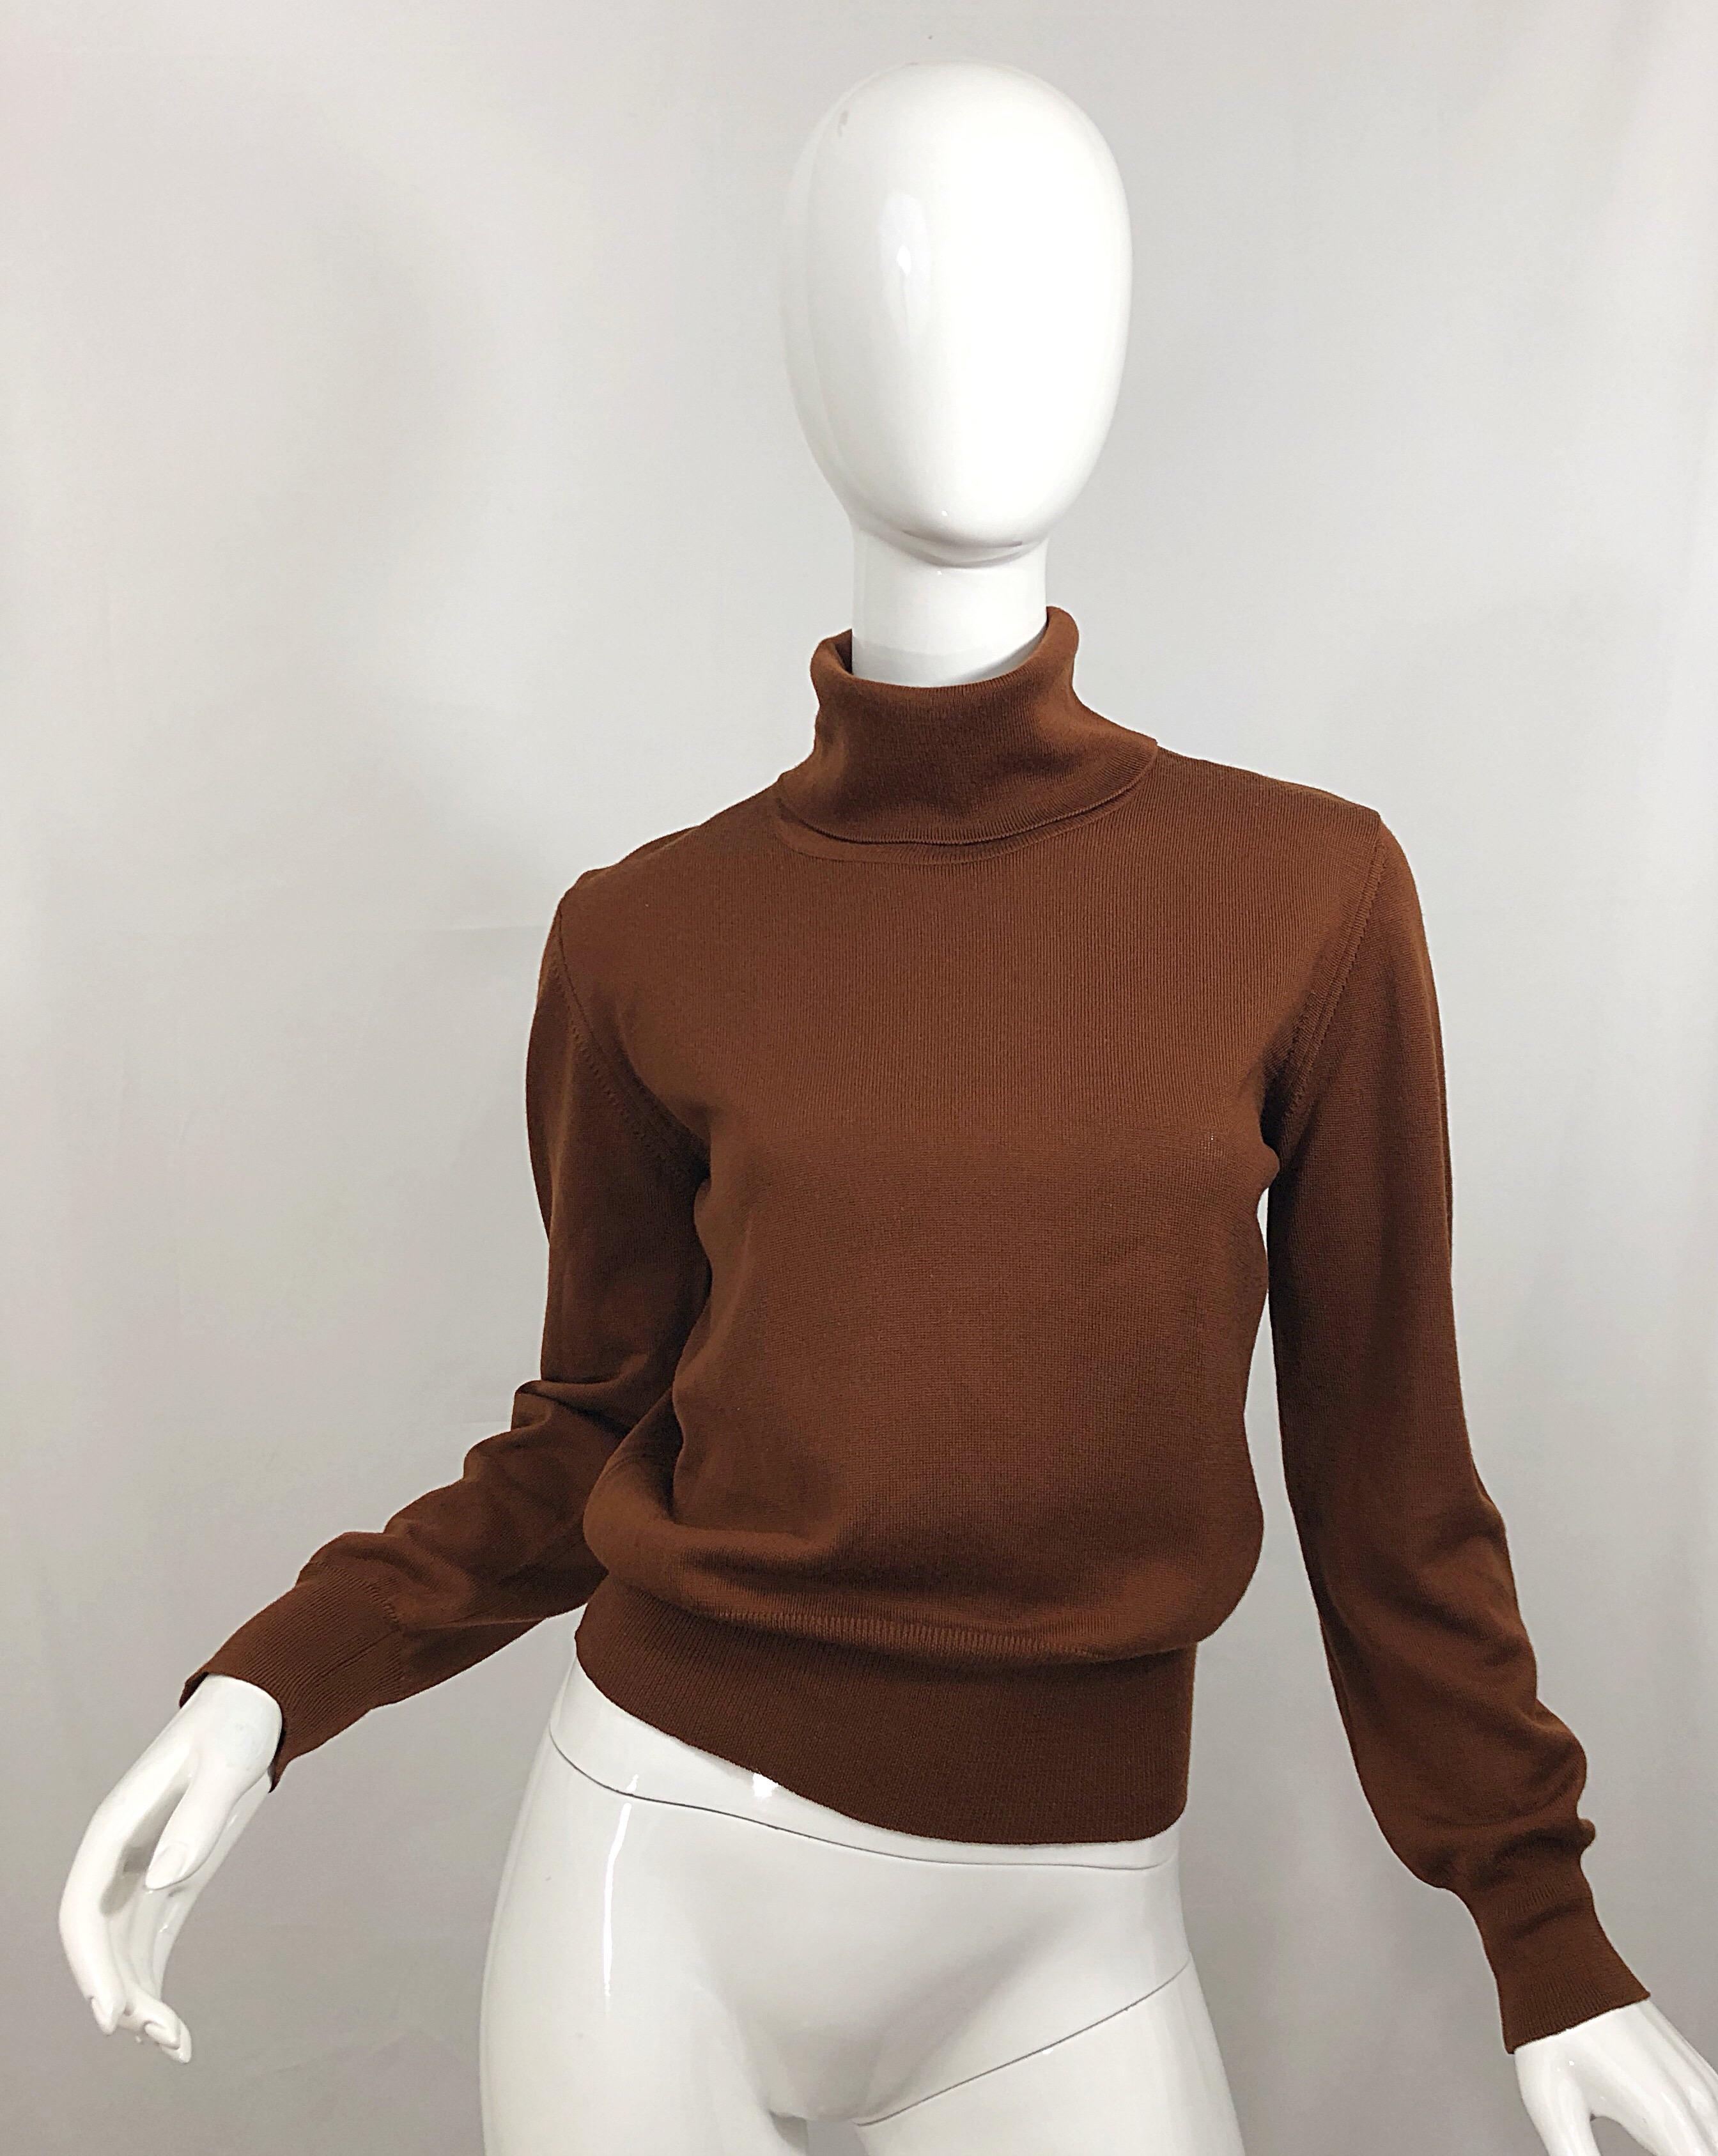 The perfect fall and winter sweater! 1990s ESCADA by MARGARETHA LEY rich caramel brown wool turtleneck sweater! Smart tailored fit is stylish while keeping you warm. Super soft virgin wool. Can easily be dressed up or down. Great with jeans,